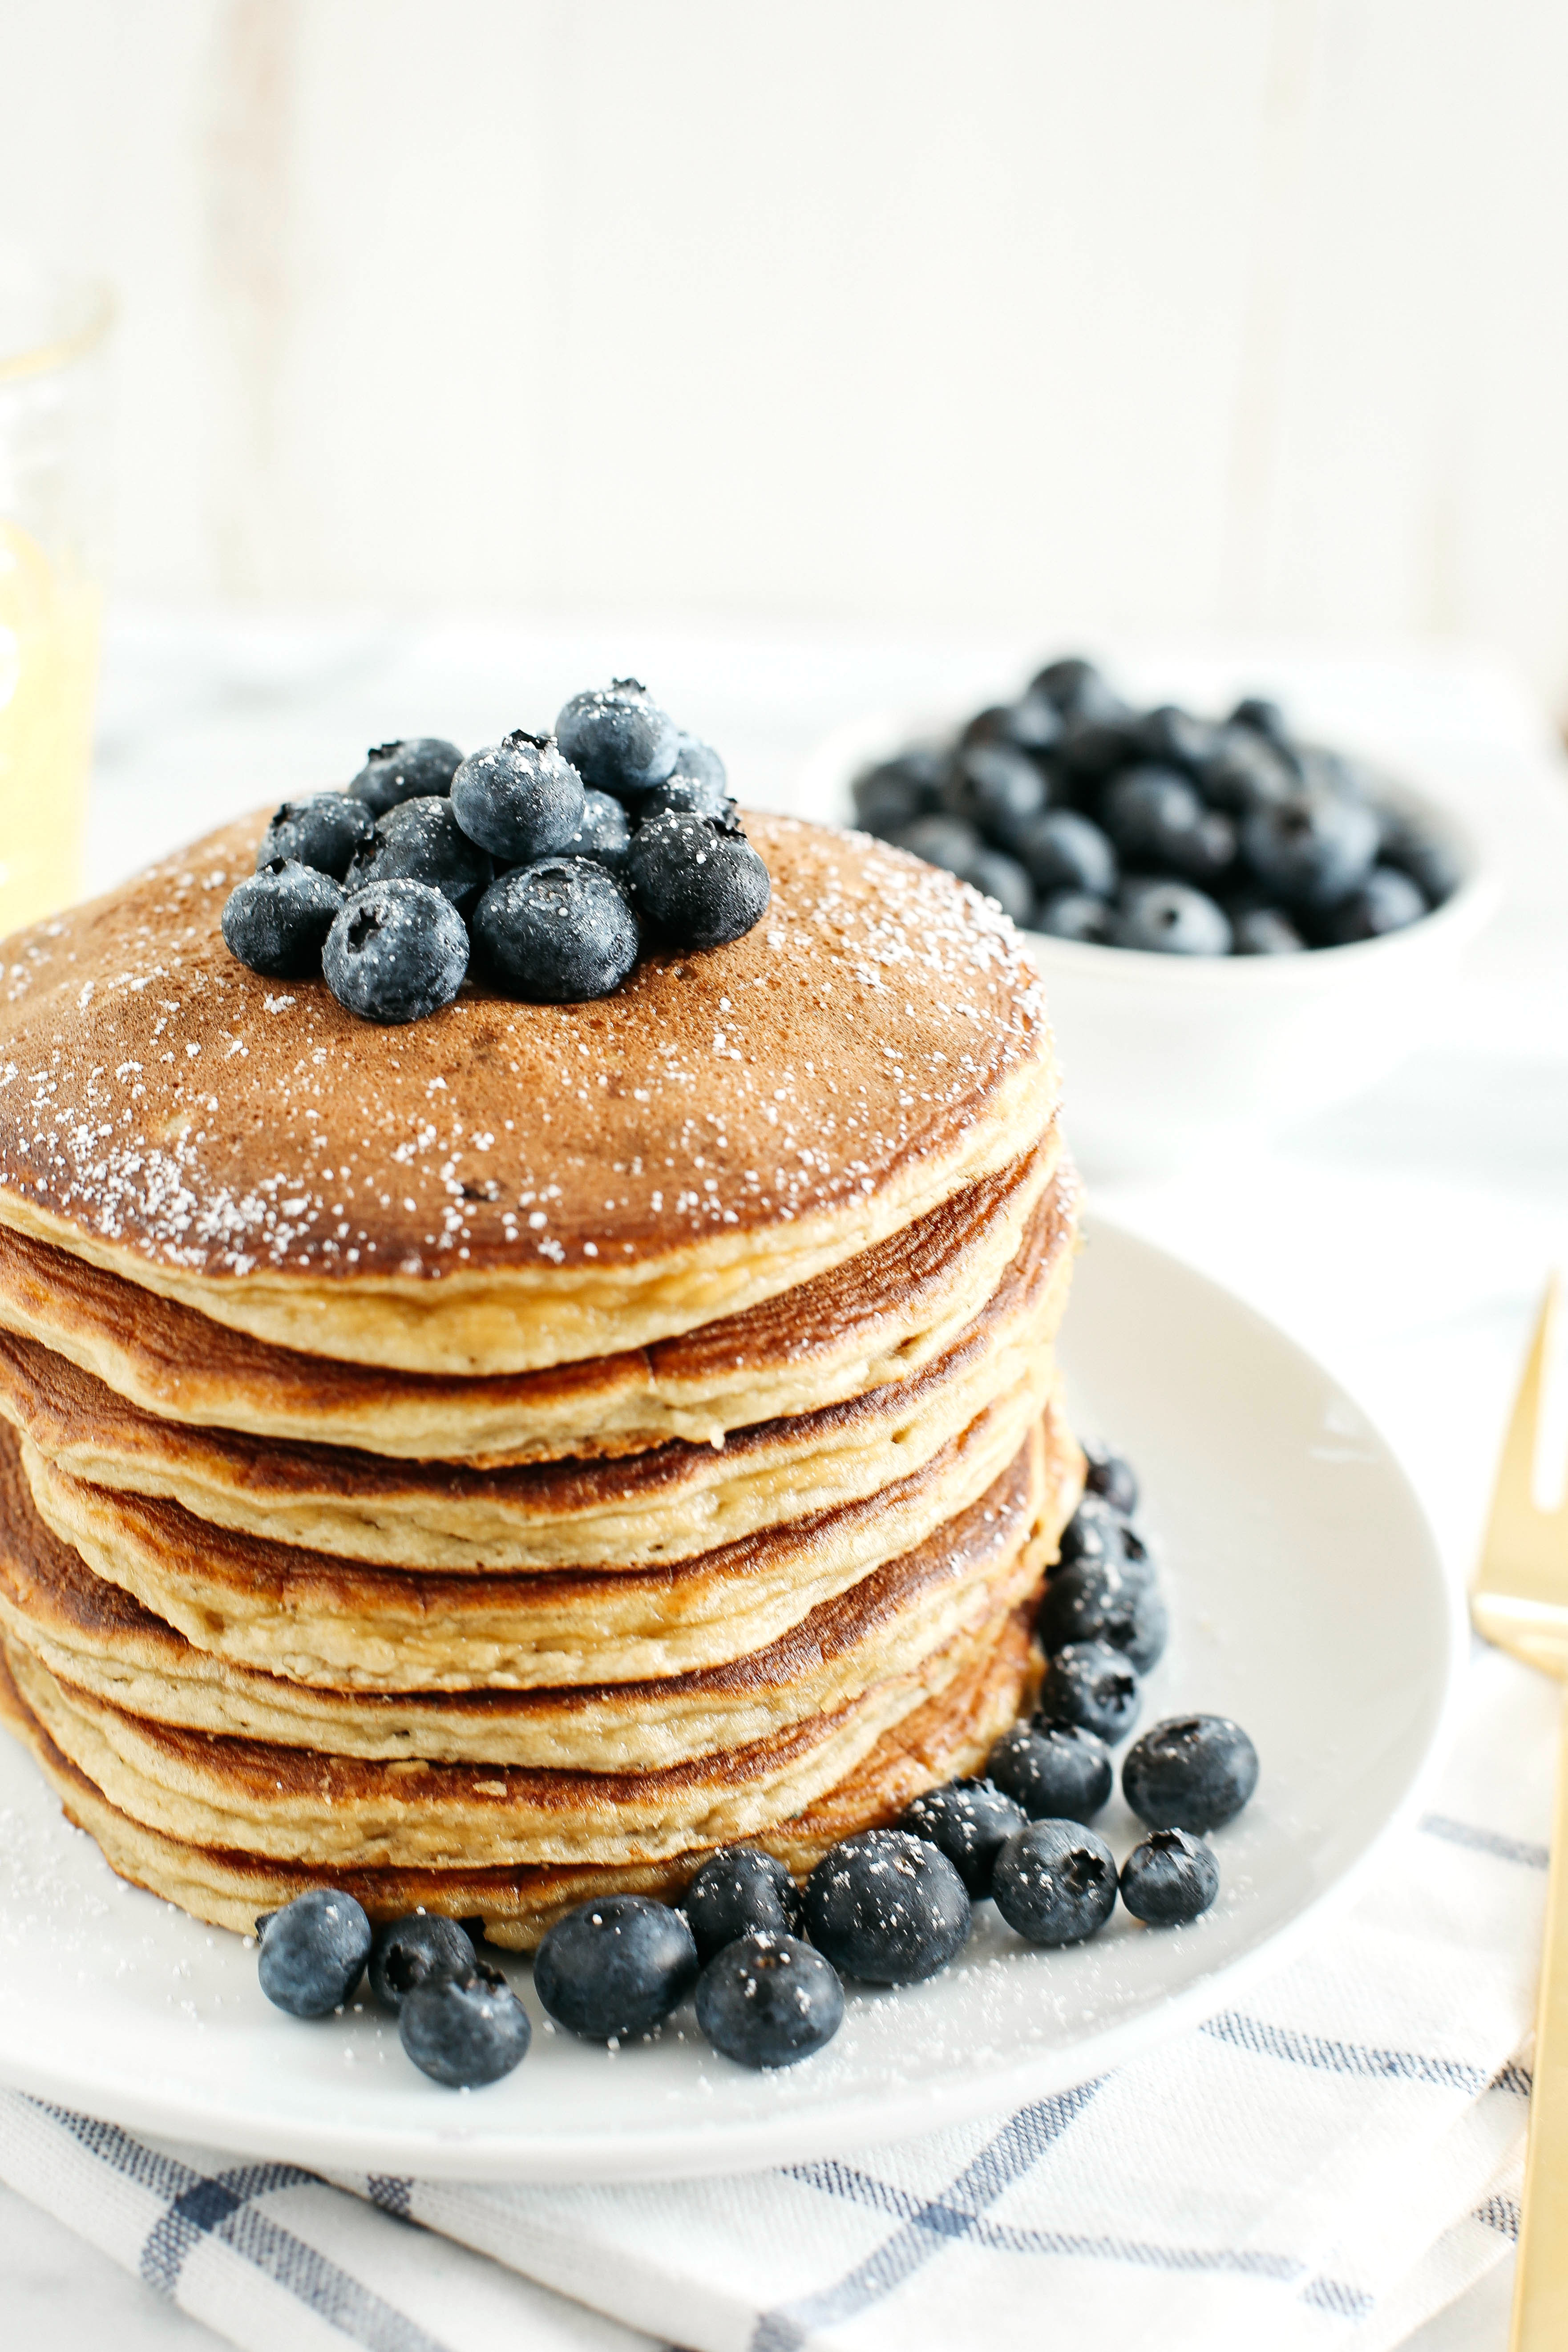 Start your morning with these fluffy blueberry banana pancakes that are grain-free, gluten-free and refined sugar-free and made with almond flour for an easy delicious breakfast!